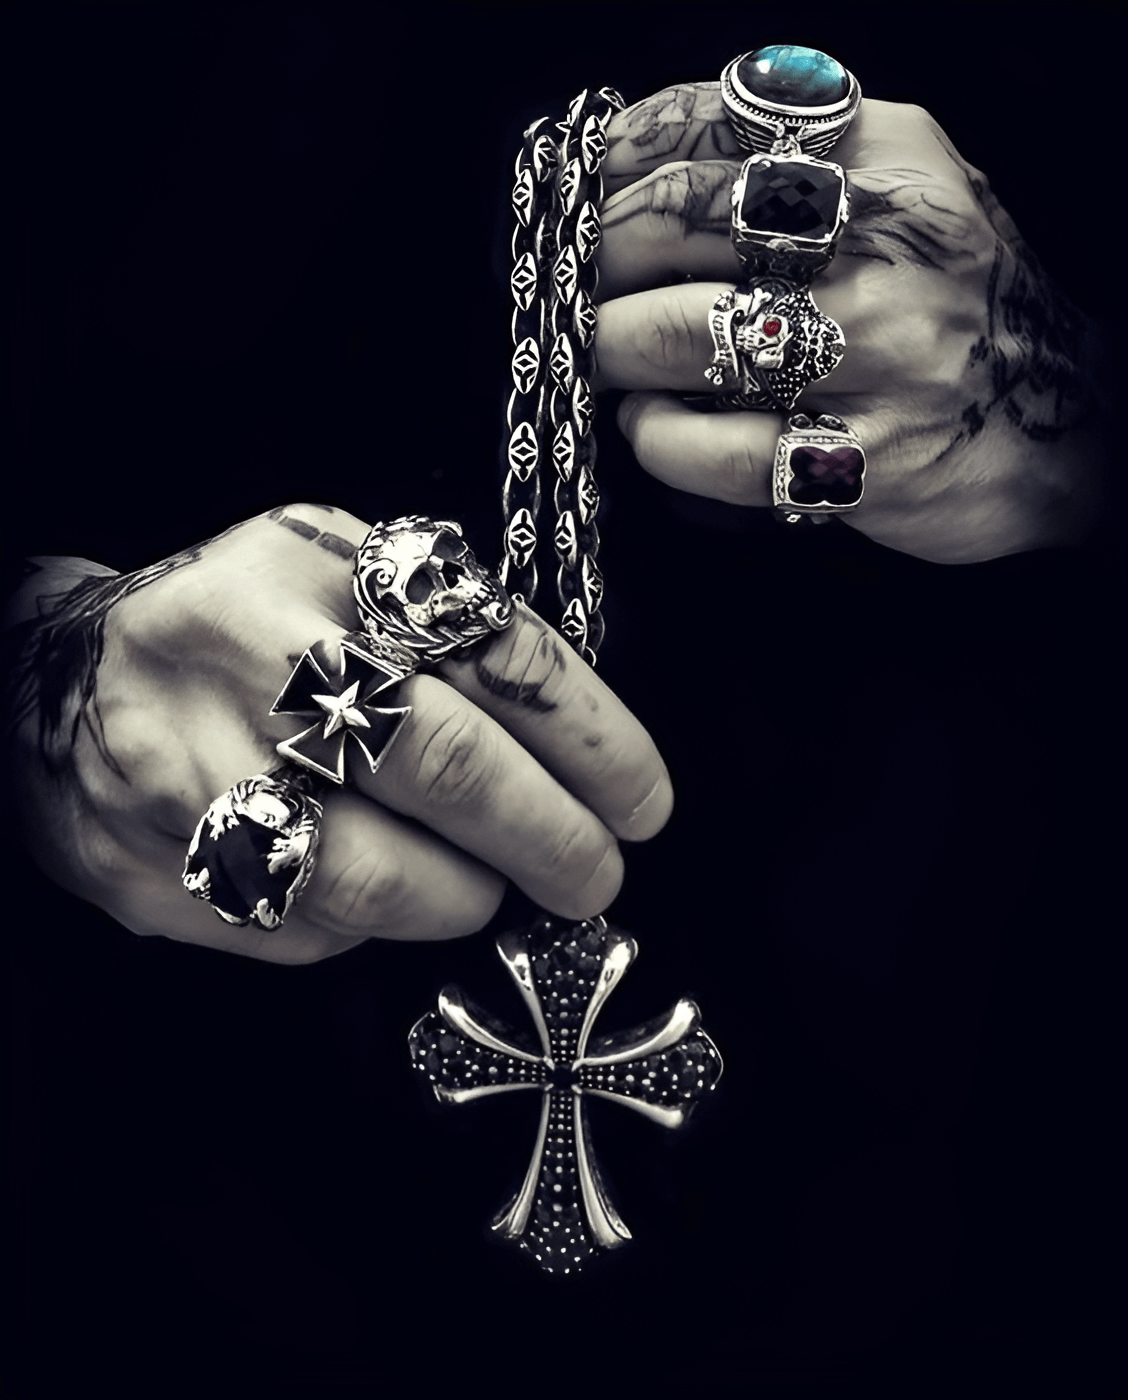 Tattooed hands with silver skull rings and cross pendant.